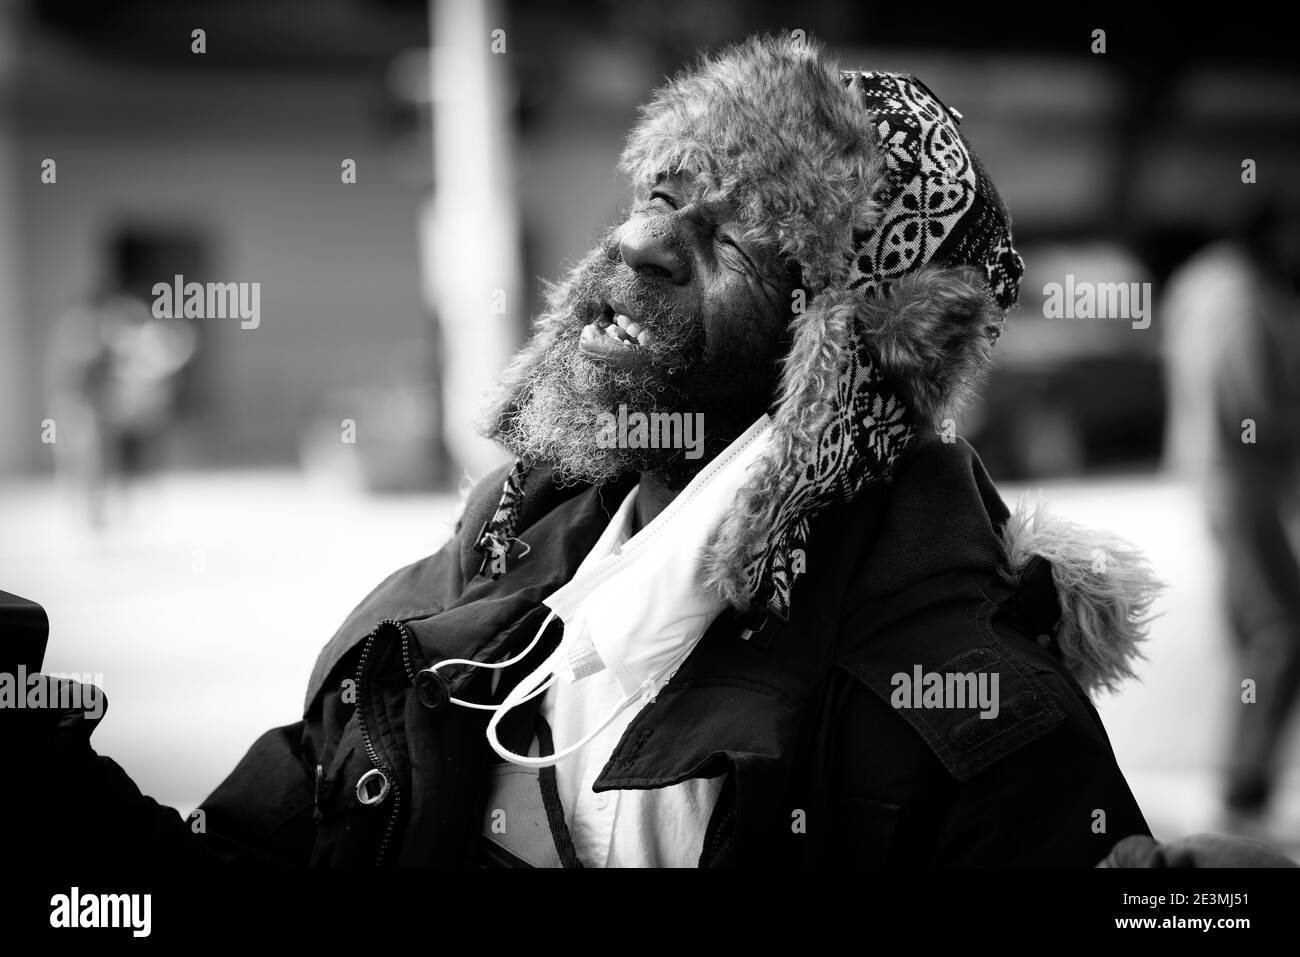 Atlanta, Georgia, USA. January 19, 2021: A homeless and unemployed man finds joy in the moment with others in the same situation. The city is experiencing a growing homeless population in the city, which recently was estimated at well over 3,000 in the past year. Social workers who monitor the situation said there are several reasons for more people on the streets, including the large Peachtree-Pine shelter closing in 2017, the coronavirus pandemic, and 'mental health issues going through the roof. Credit: ZUMA Press, Inc./Alamy Live News Stock Photo